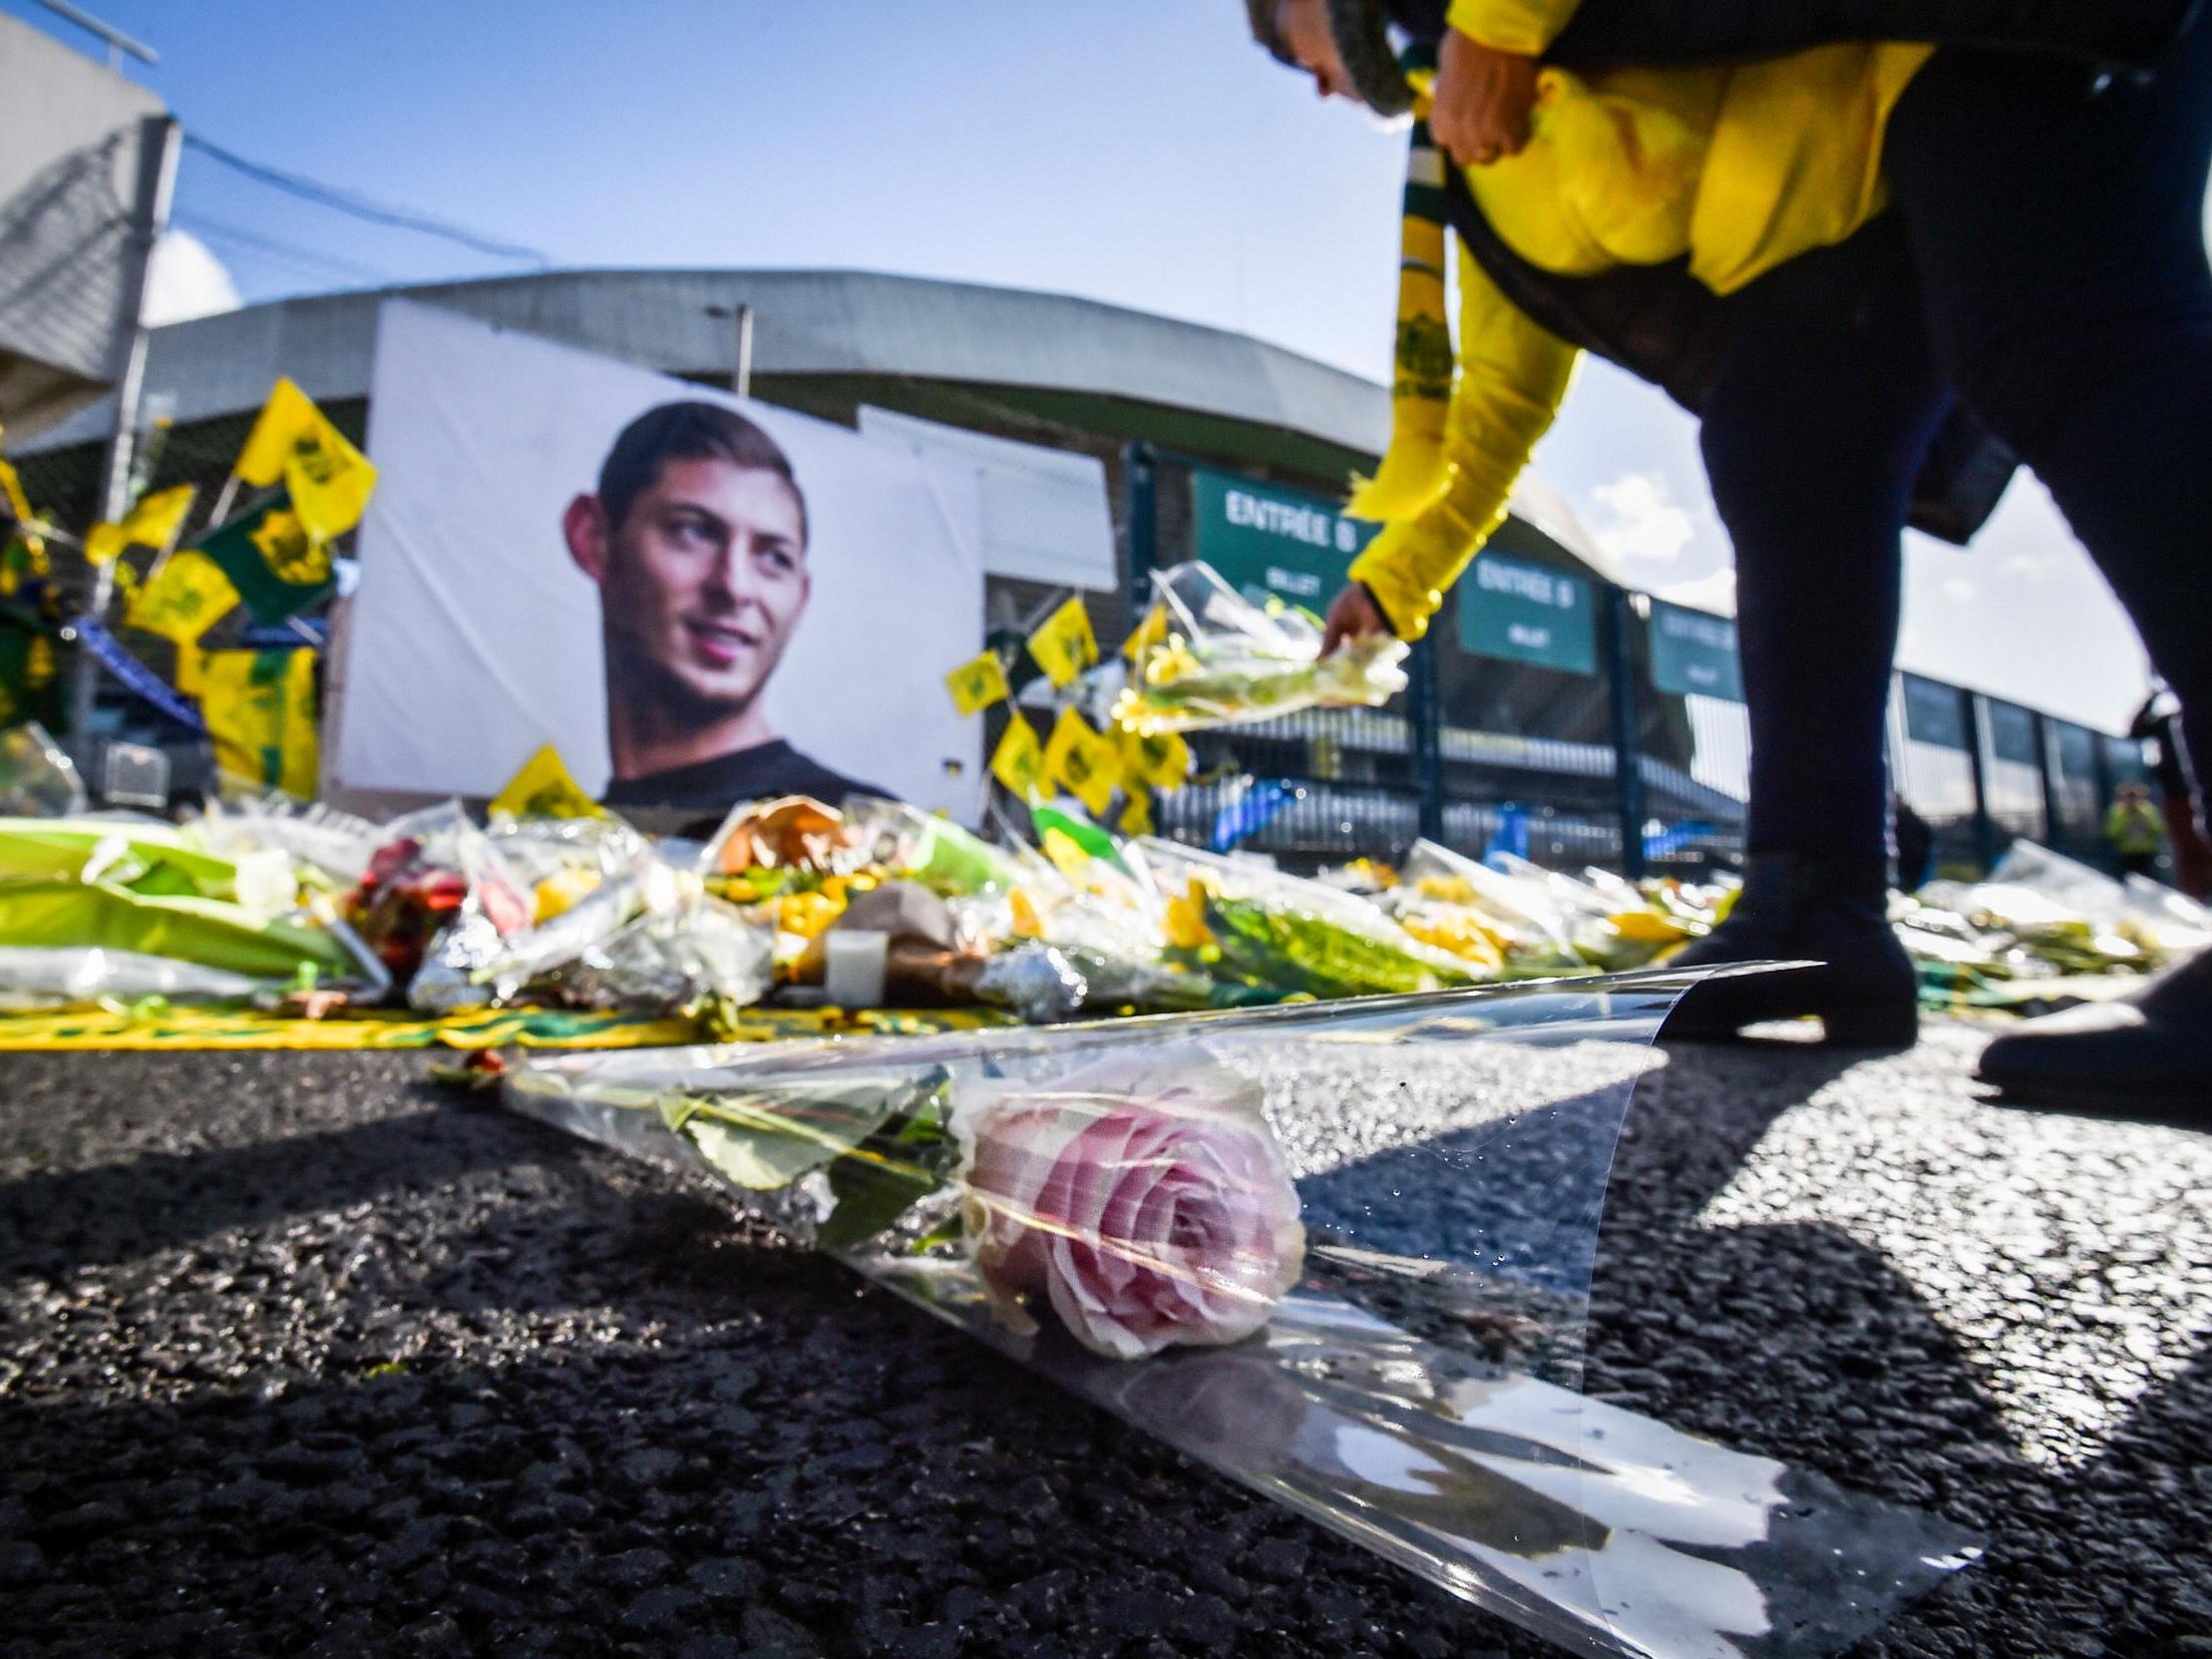 There was an outpouring of tributes among fans at Sala’s former club Nantes following the tragedy in January